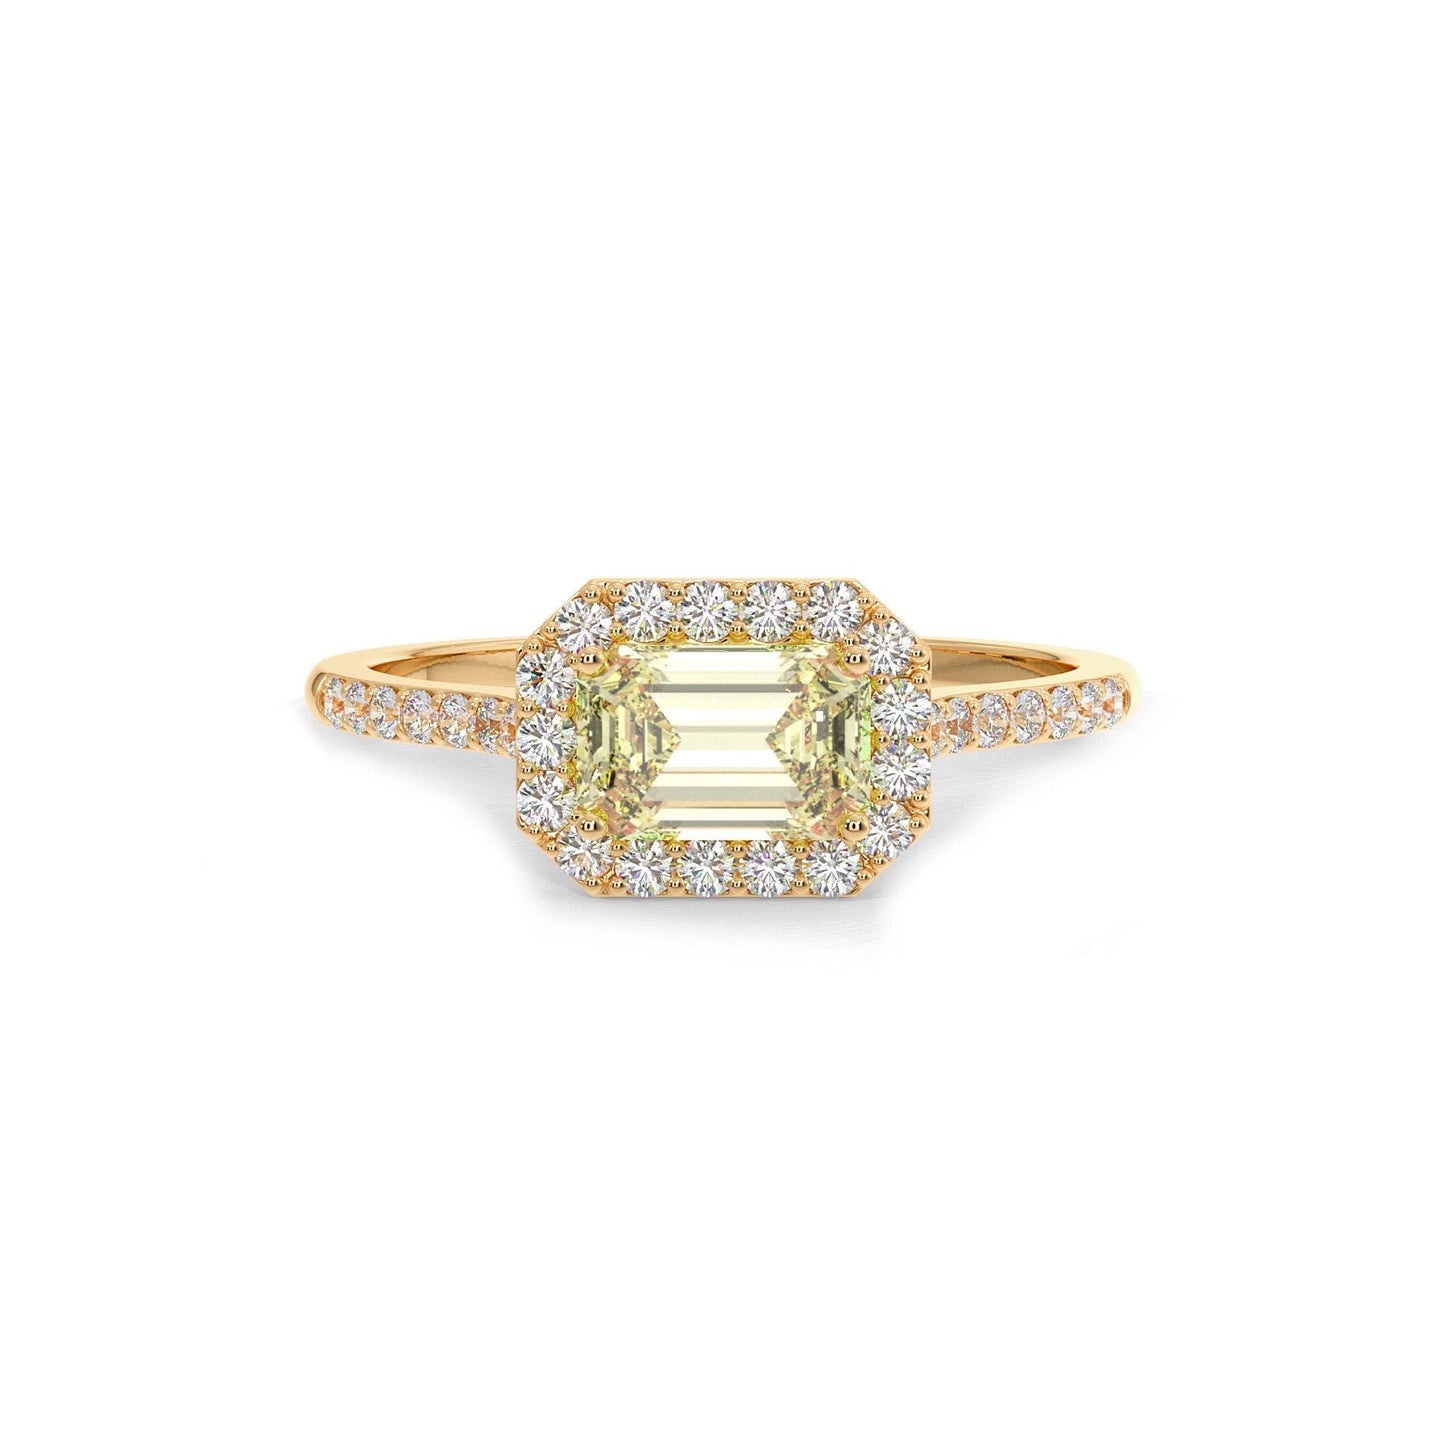 Emerald-Cut Engagement Ring, Gemstone and Diamond Engagement Ring, Birthstone Ring, Natural Green Peridot Diamond Ring, 14k Solid Gold Ring